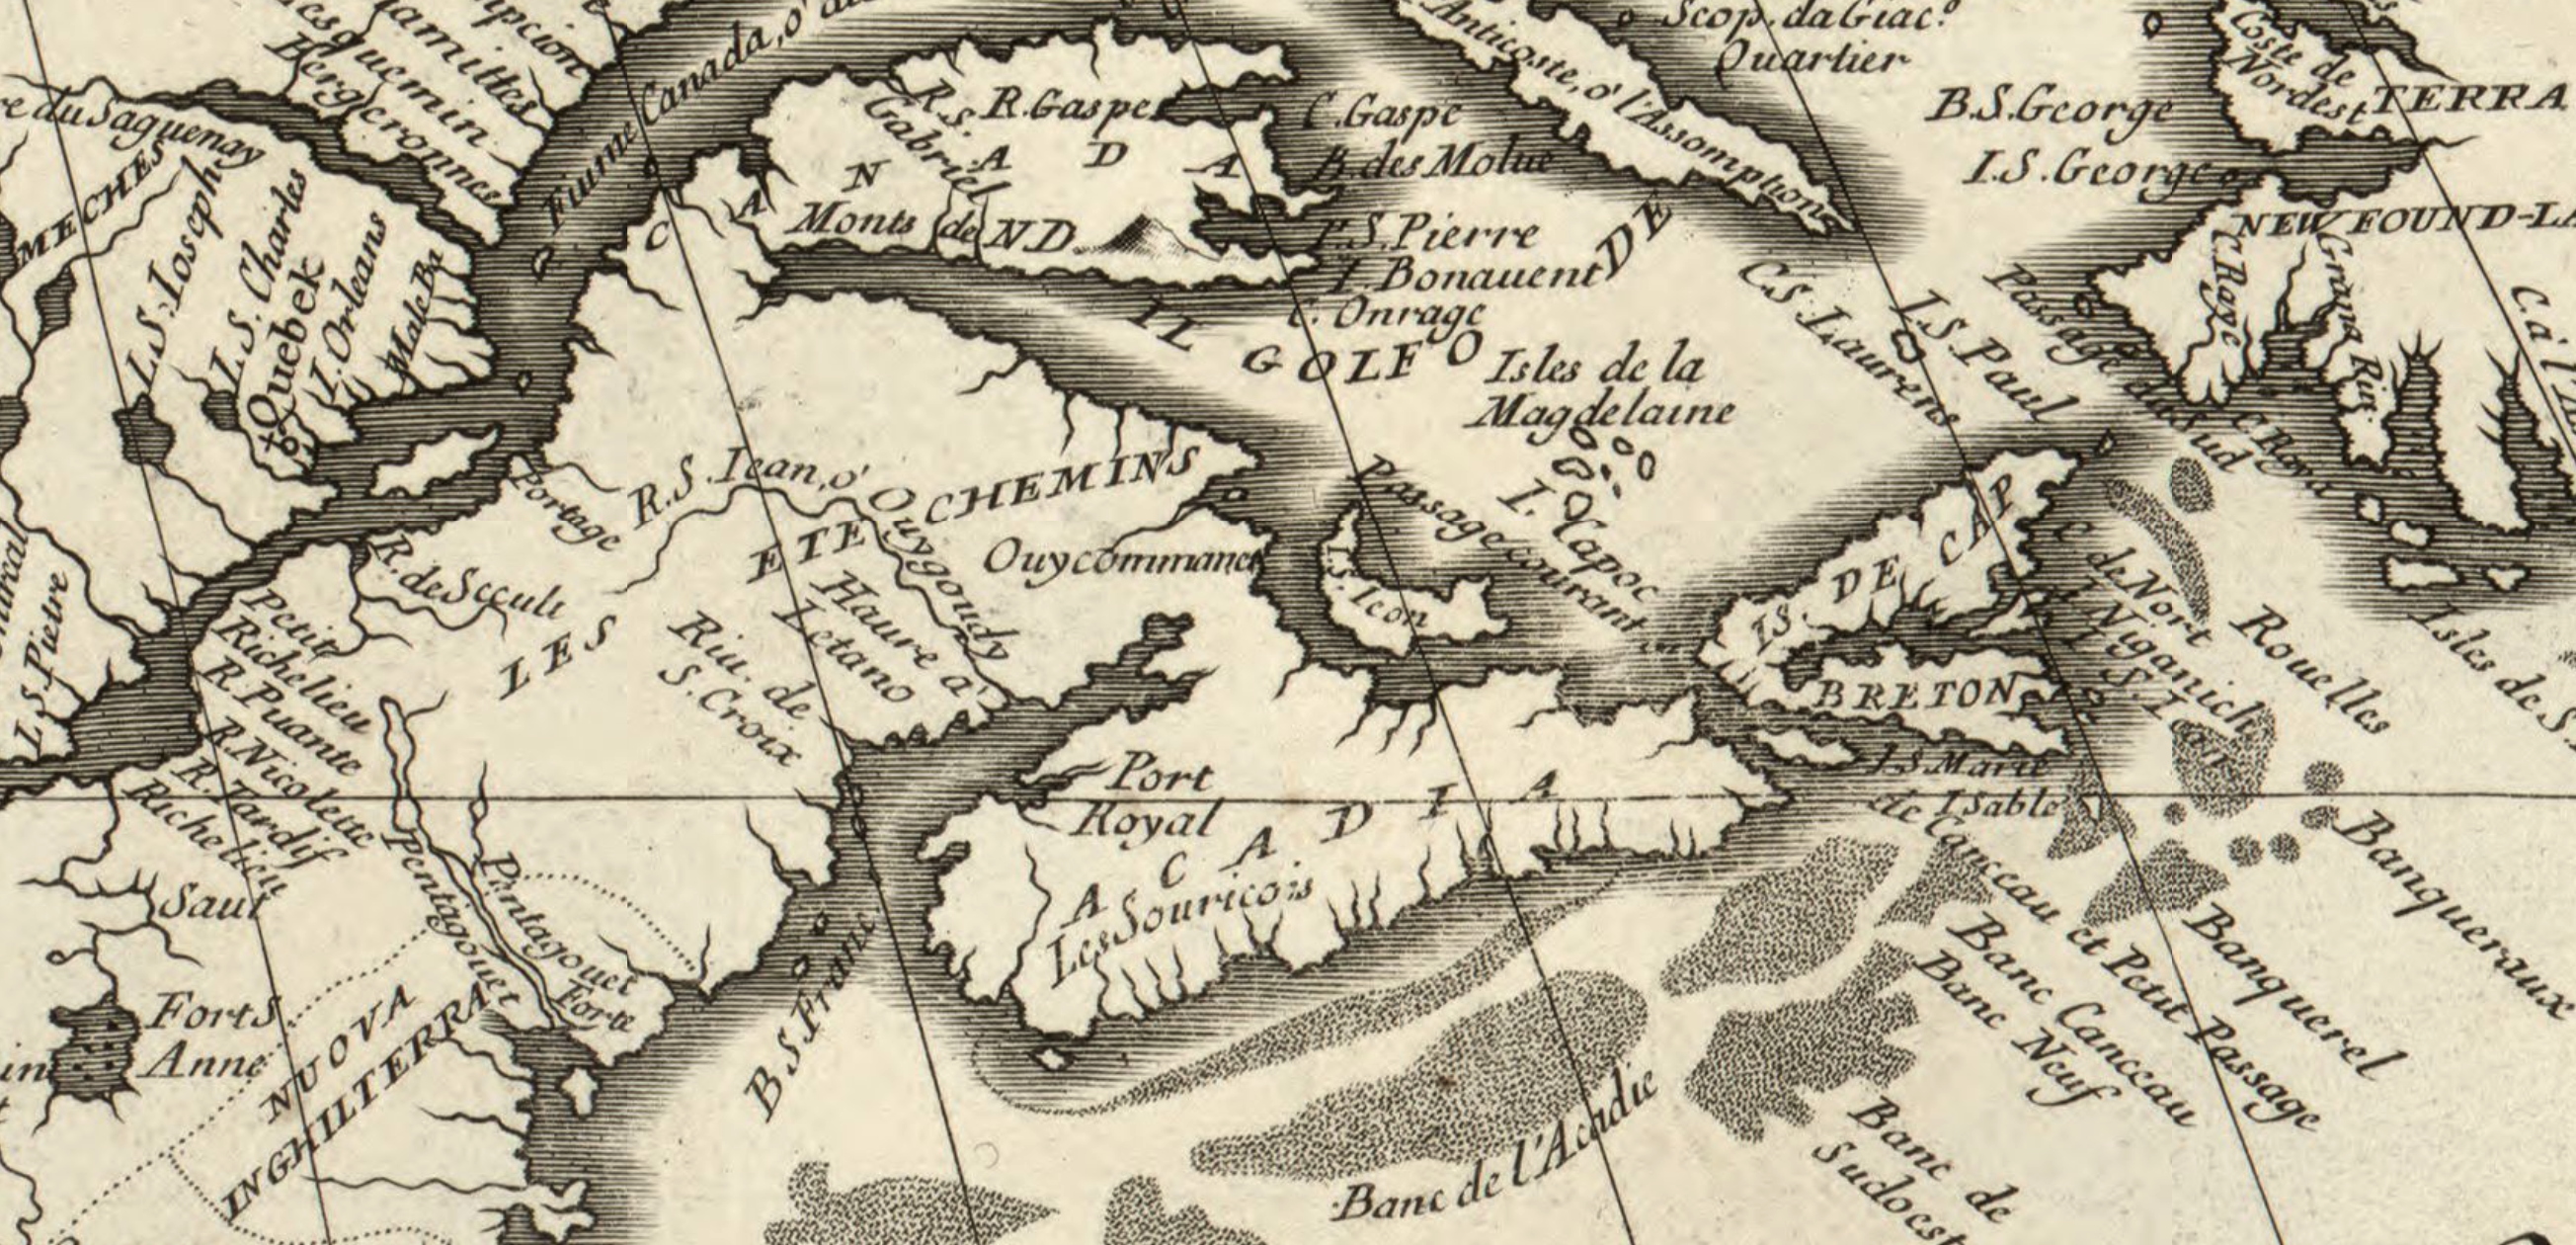 Vincenzo Coronelli's 1688 map of northeastern North America showing "Acadia", not "New Scotland"